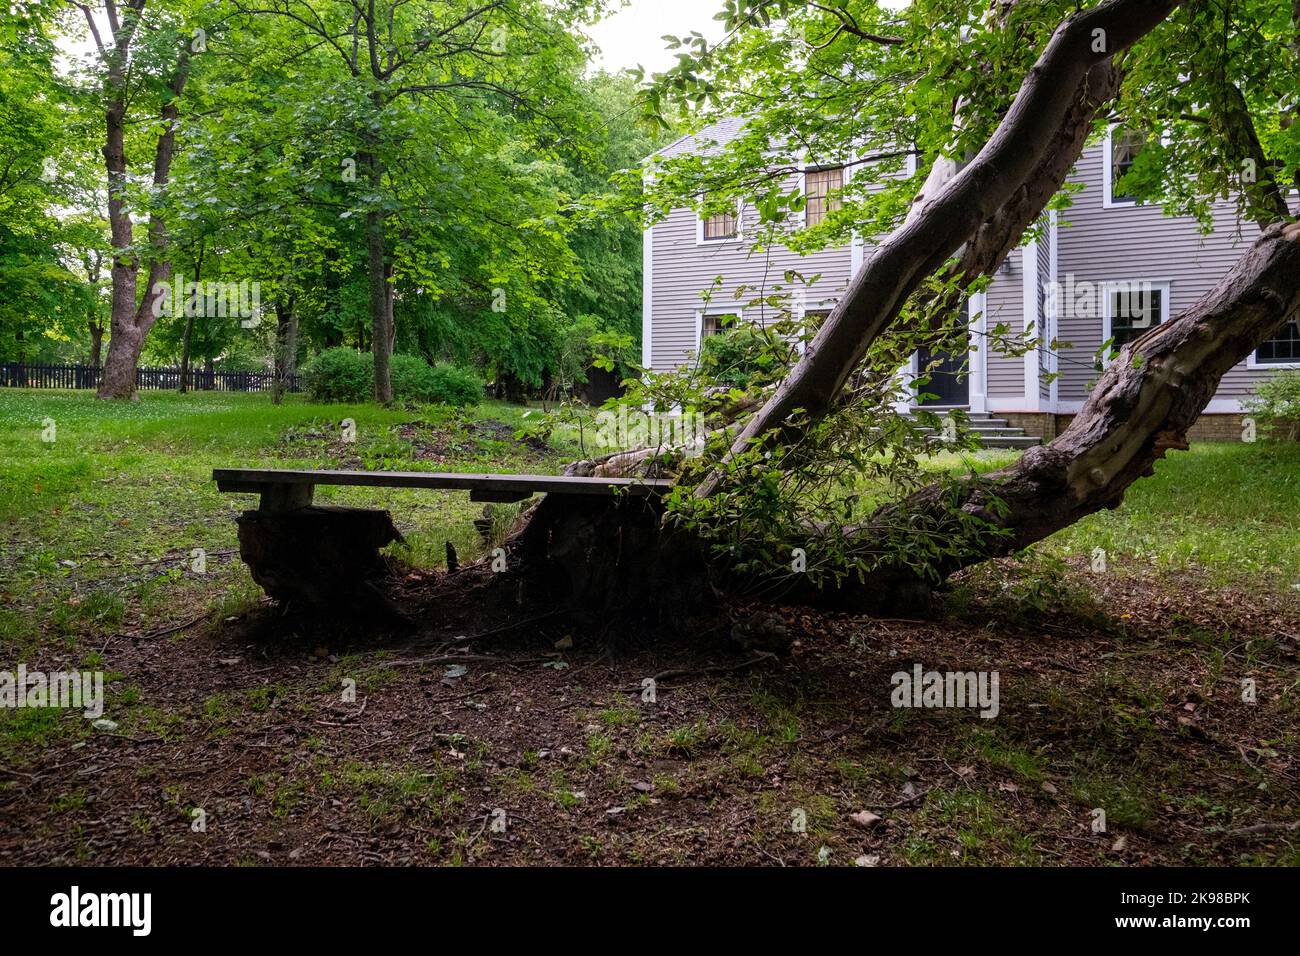 A wooden bench at the base of a large fallen maple leaf tree. There are mature trees, a black fence, and a tan colored wooden house in the background. Stock Photo